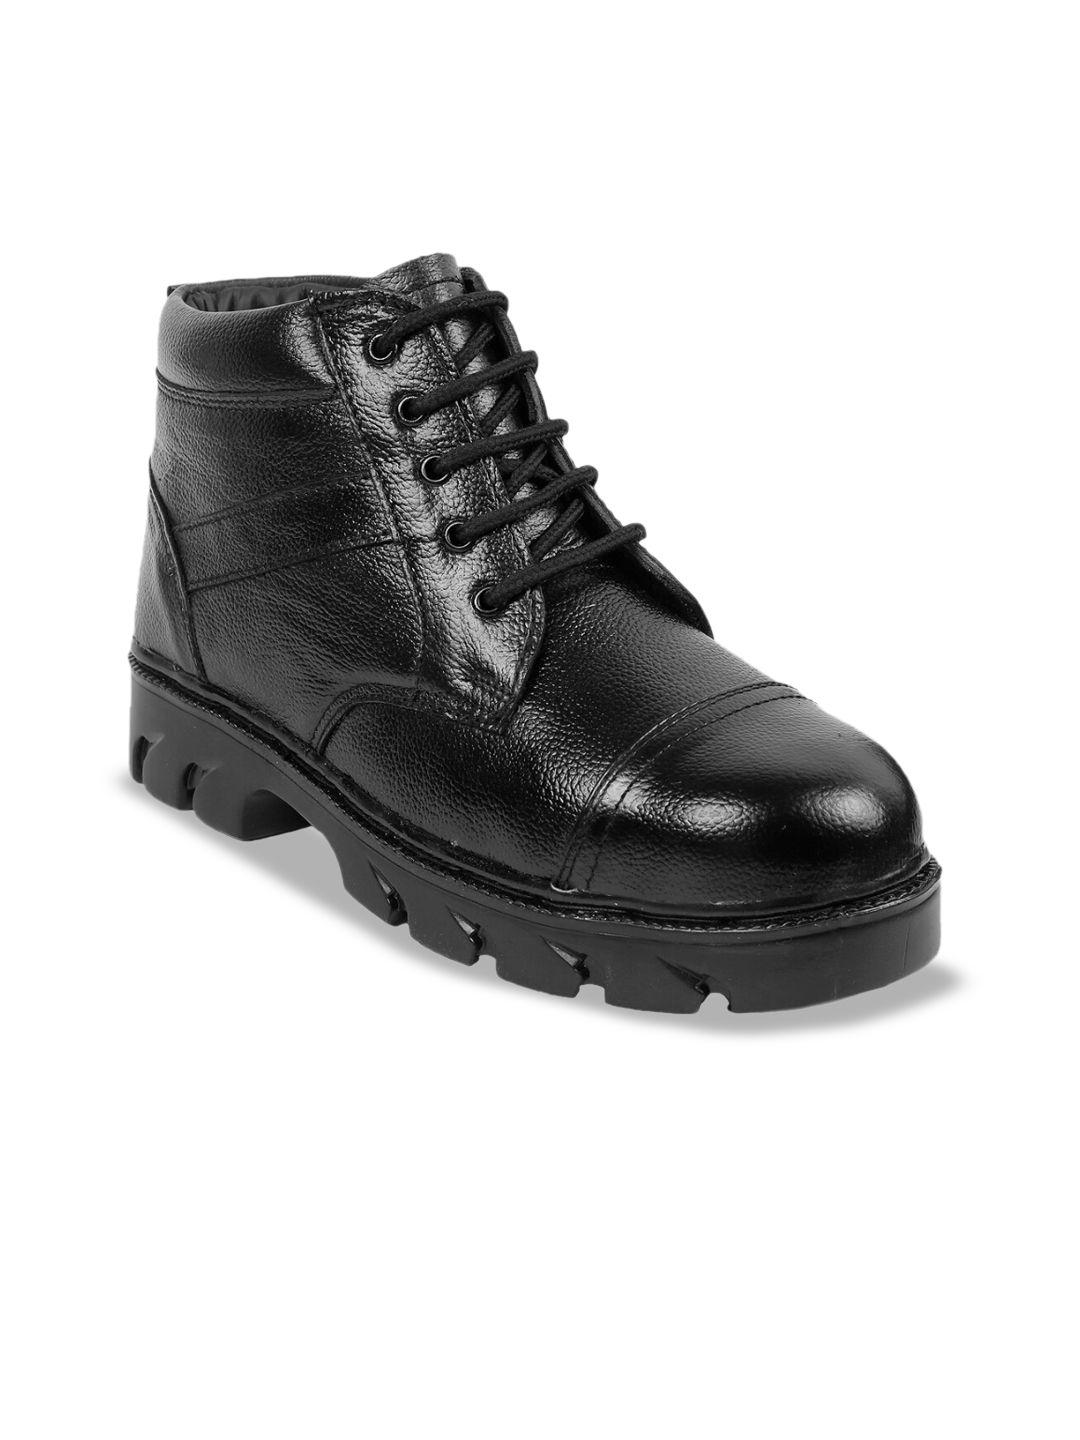 woakers men textured mid-top lace-ups boots